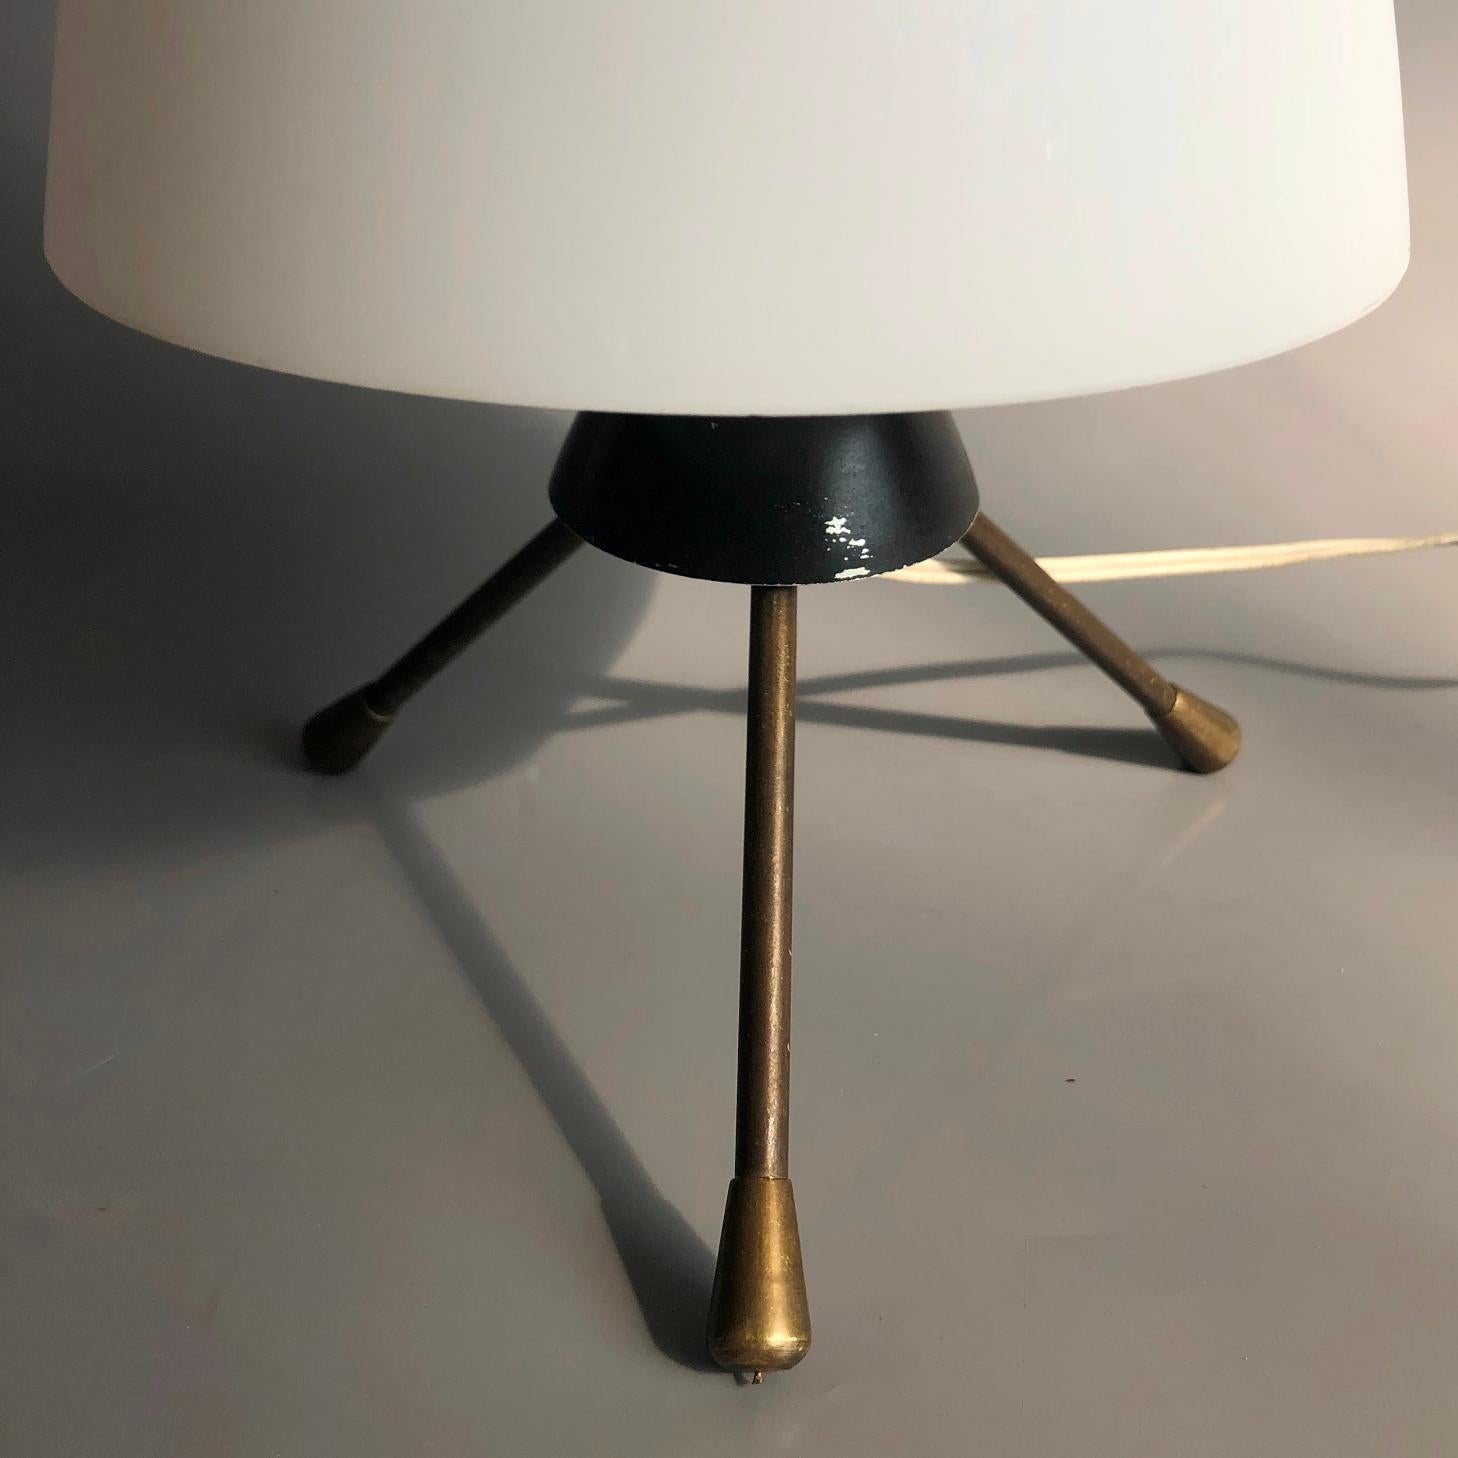 Space Age Modernist Conical Table Lamp, Italy, 1960s For Sale 6